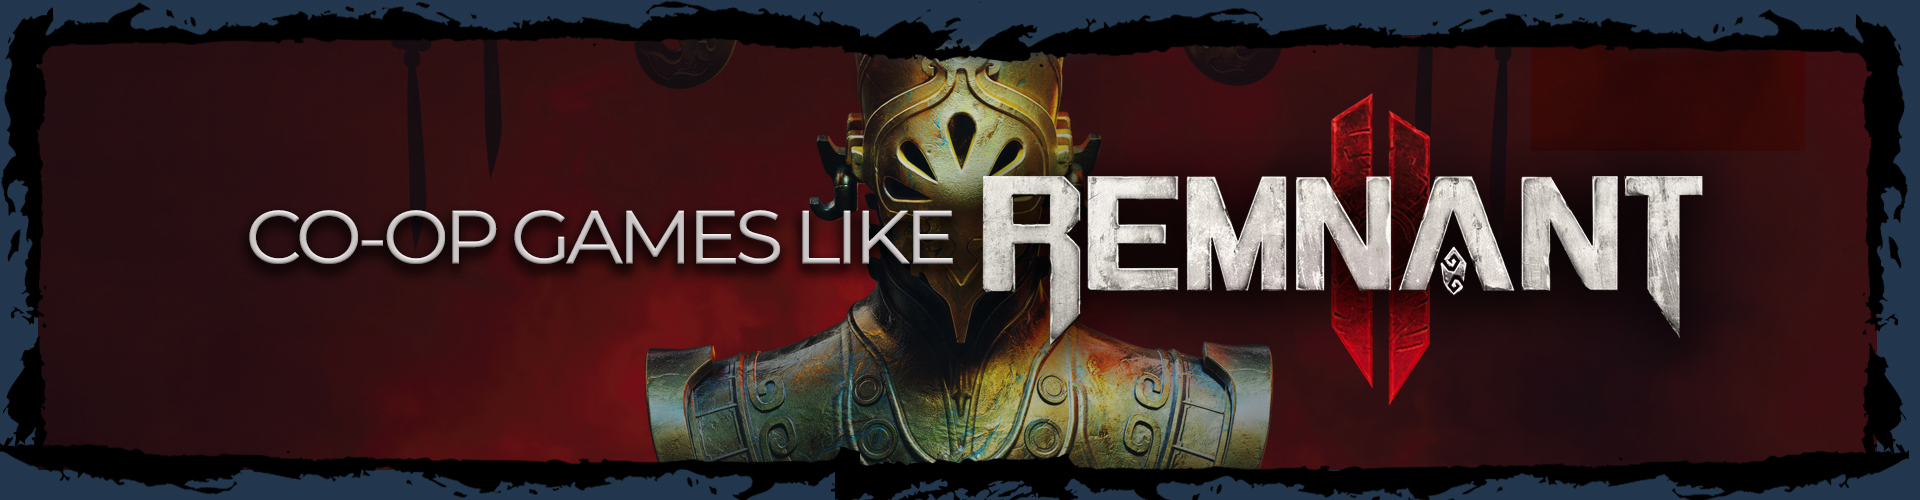 Co op games like Remnant 2